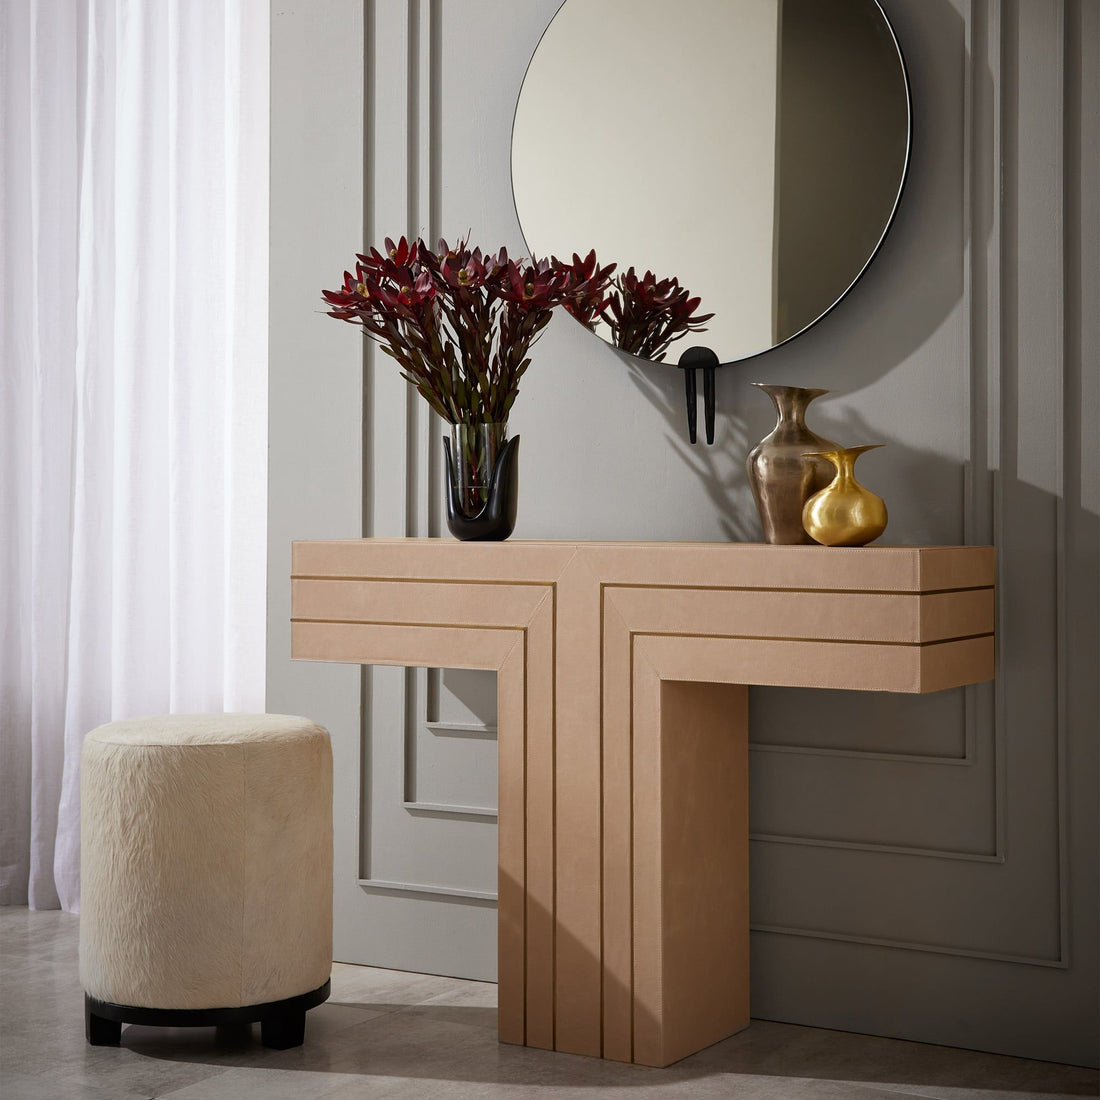 Romeo Console Taupe Leather and Antique Brass